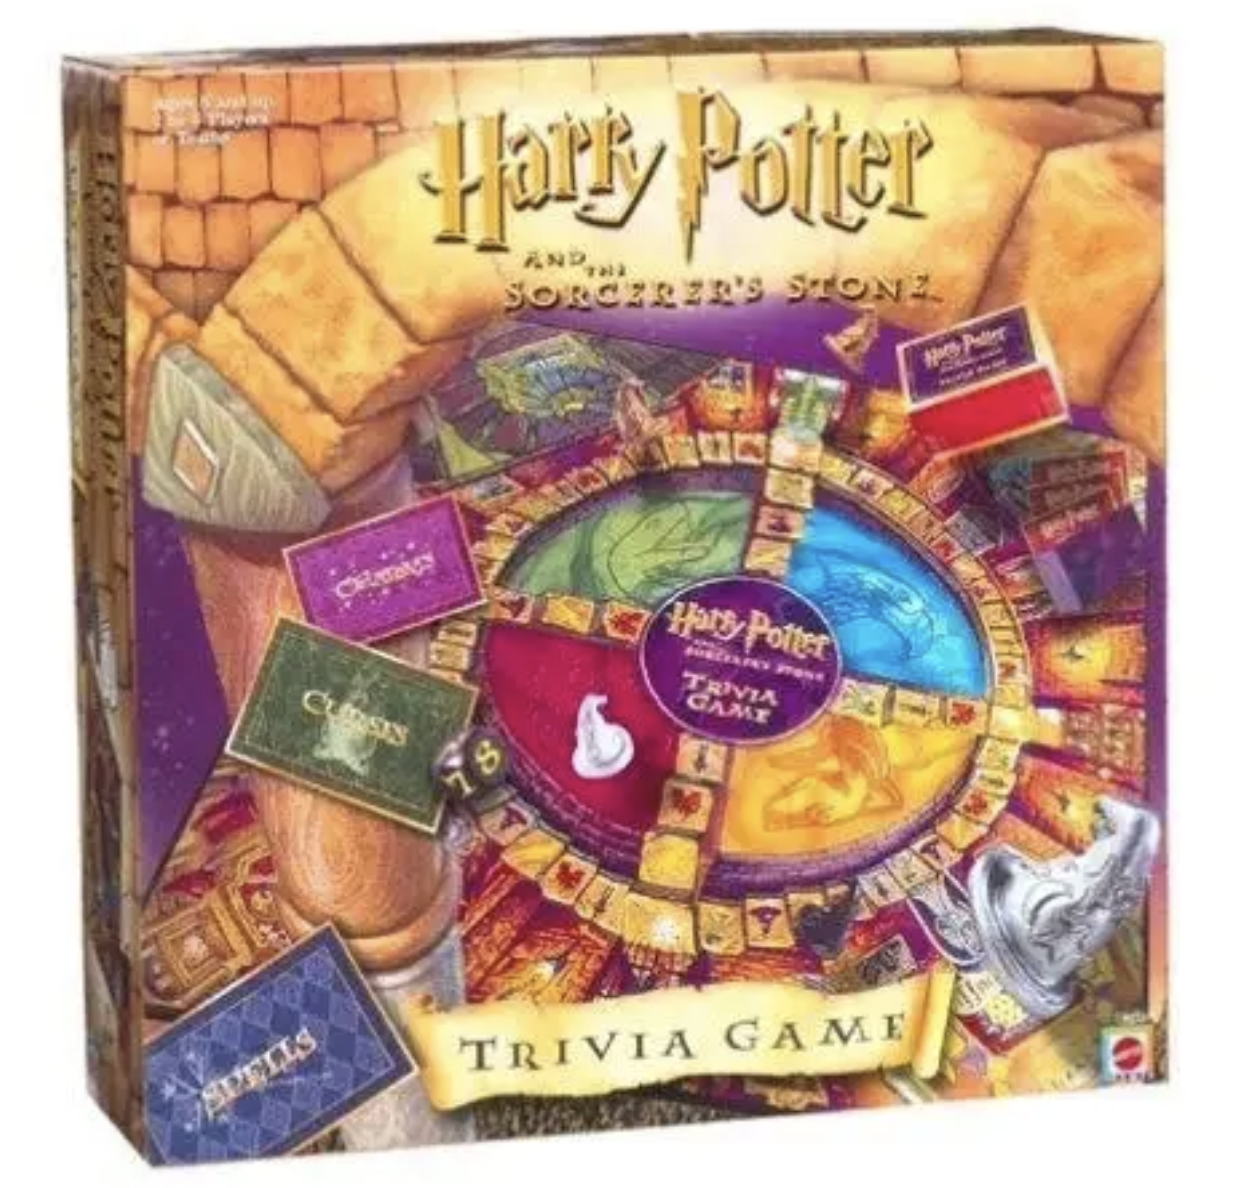 HARRY POTTER AND THE PHILOSOPHERS STONE TRIVIA GAME SPARES PIECES PARTS ONLY 